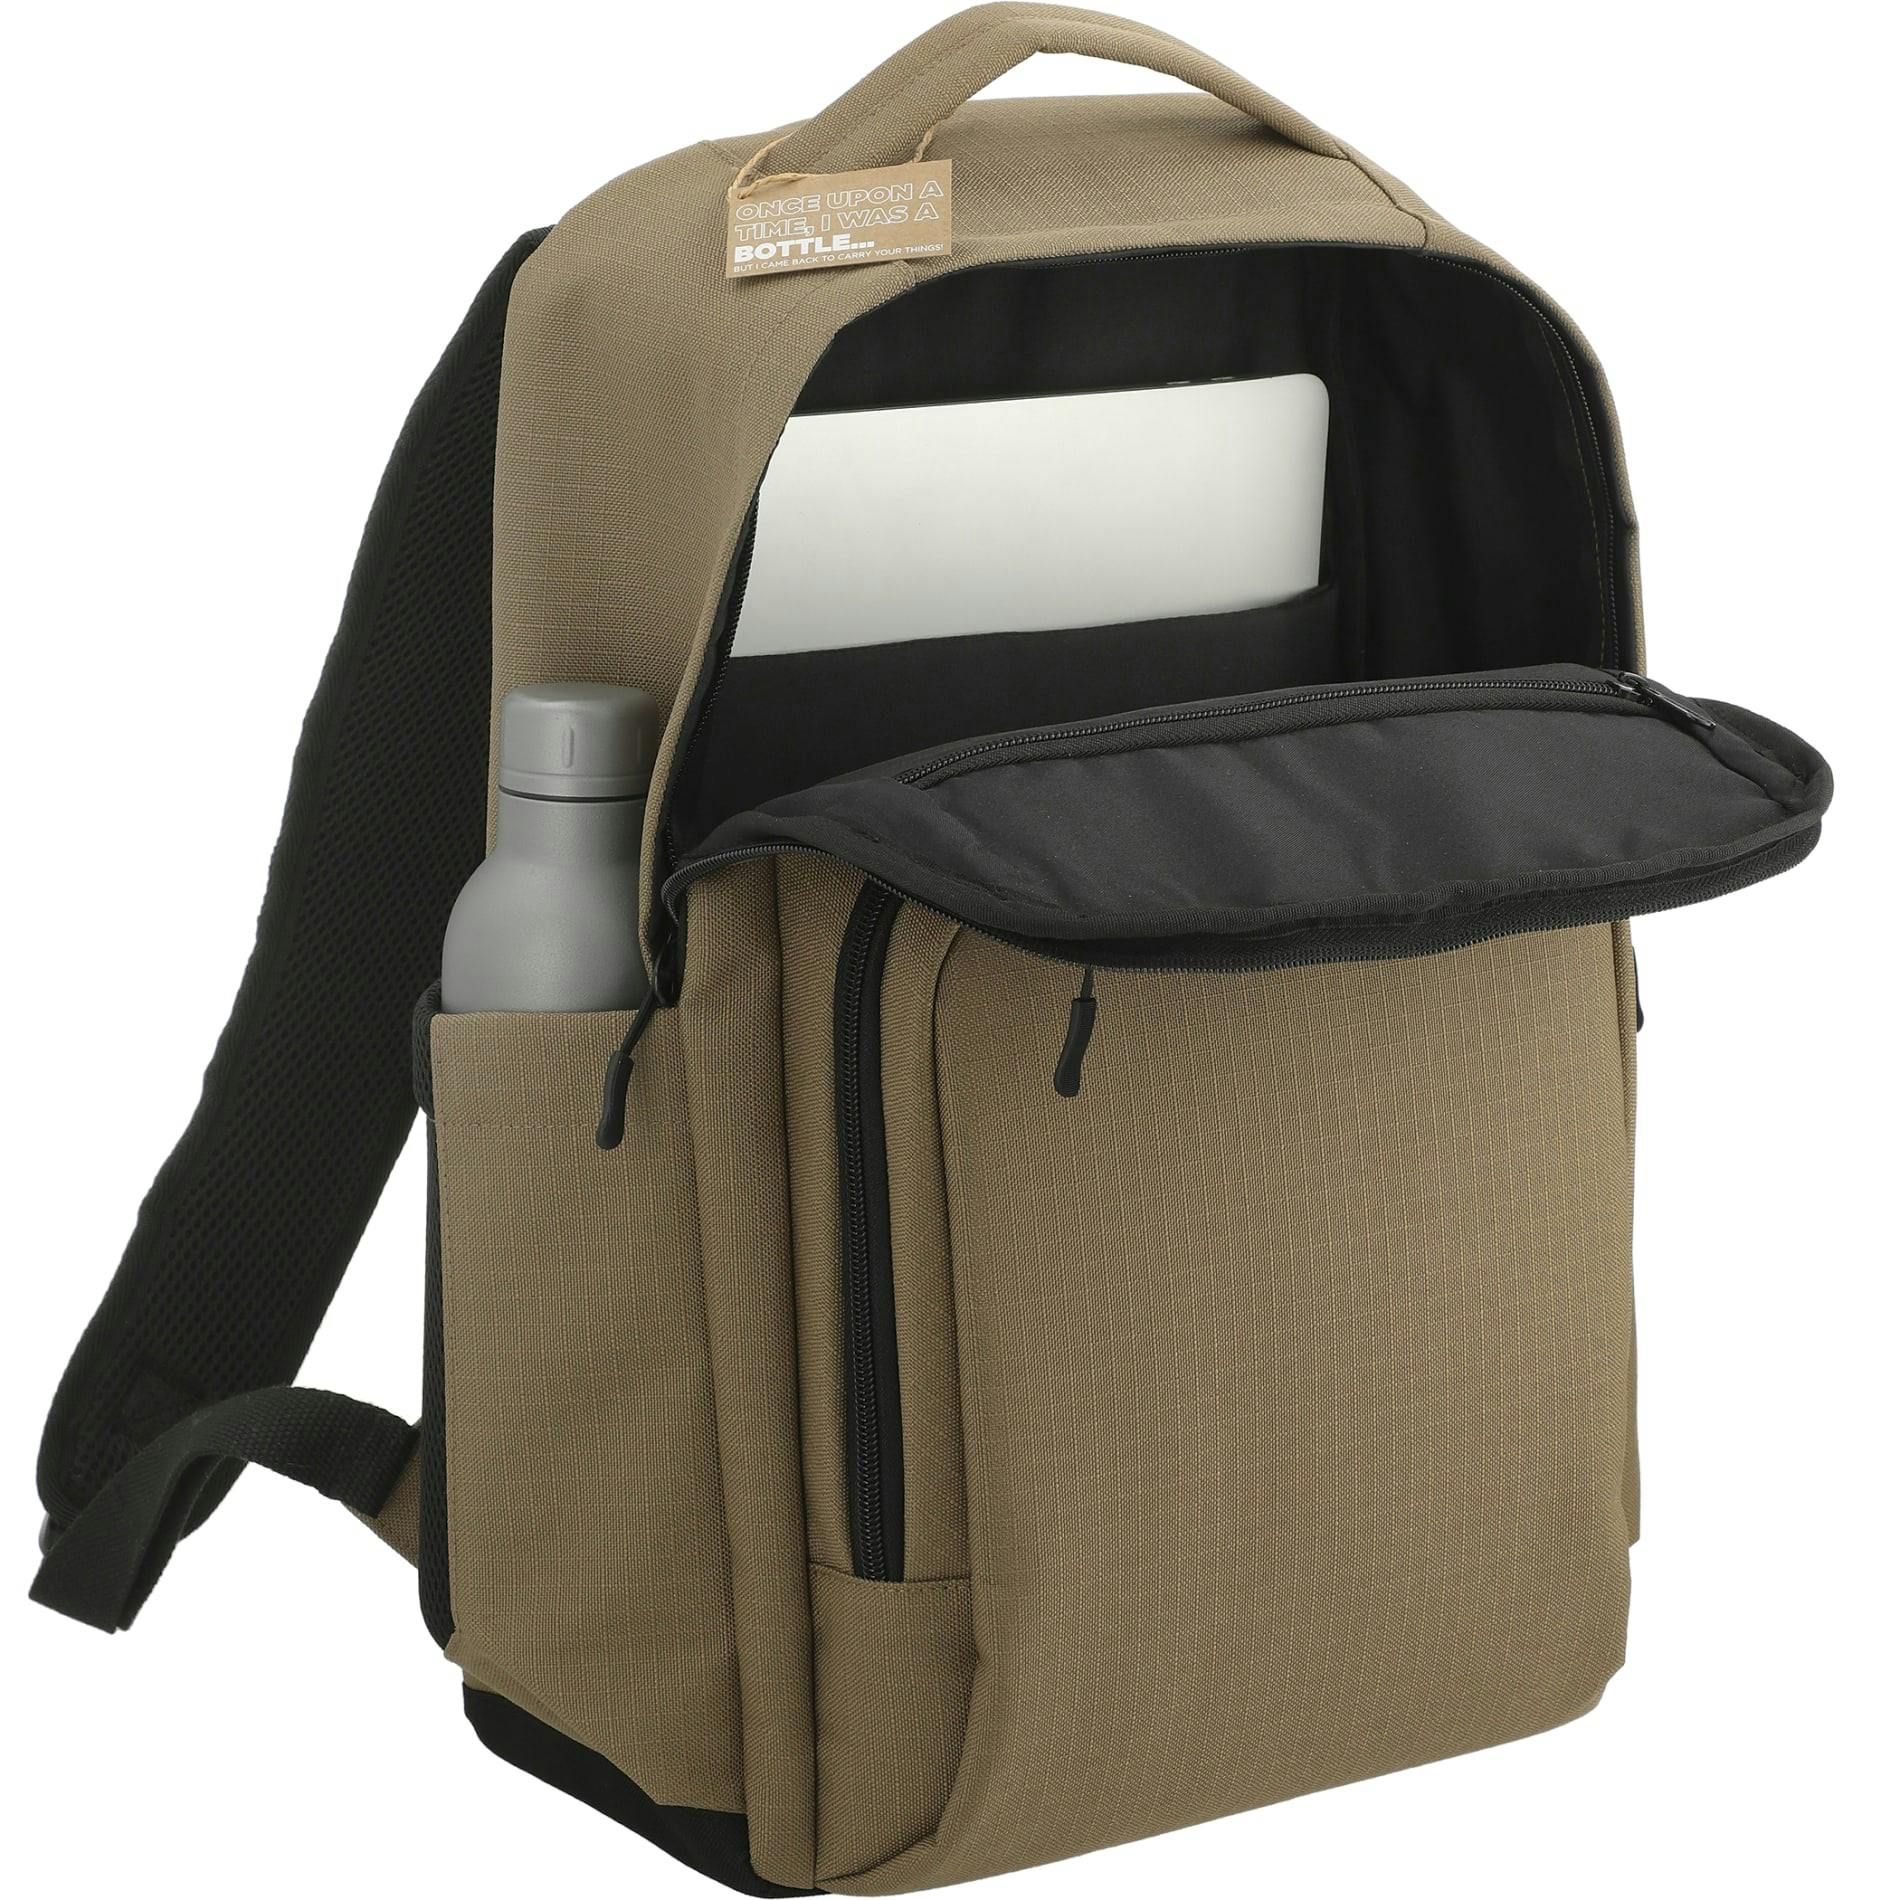 NBN Recycled Utility Insulated Backpack - additional Image 1